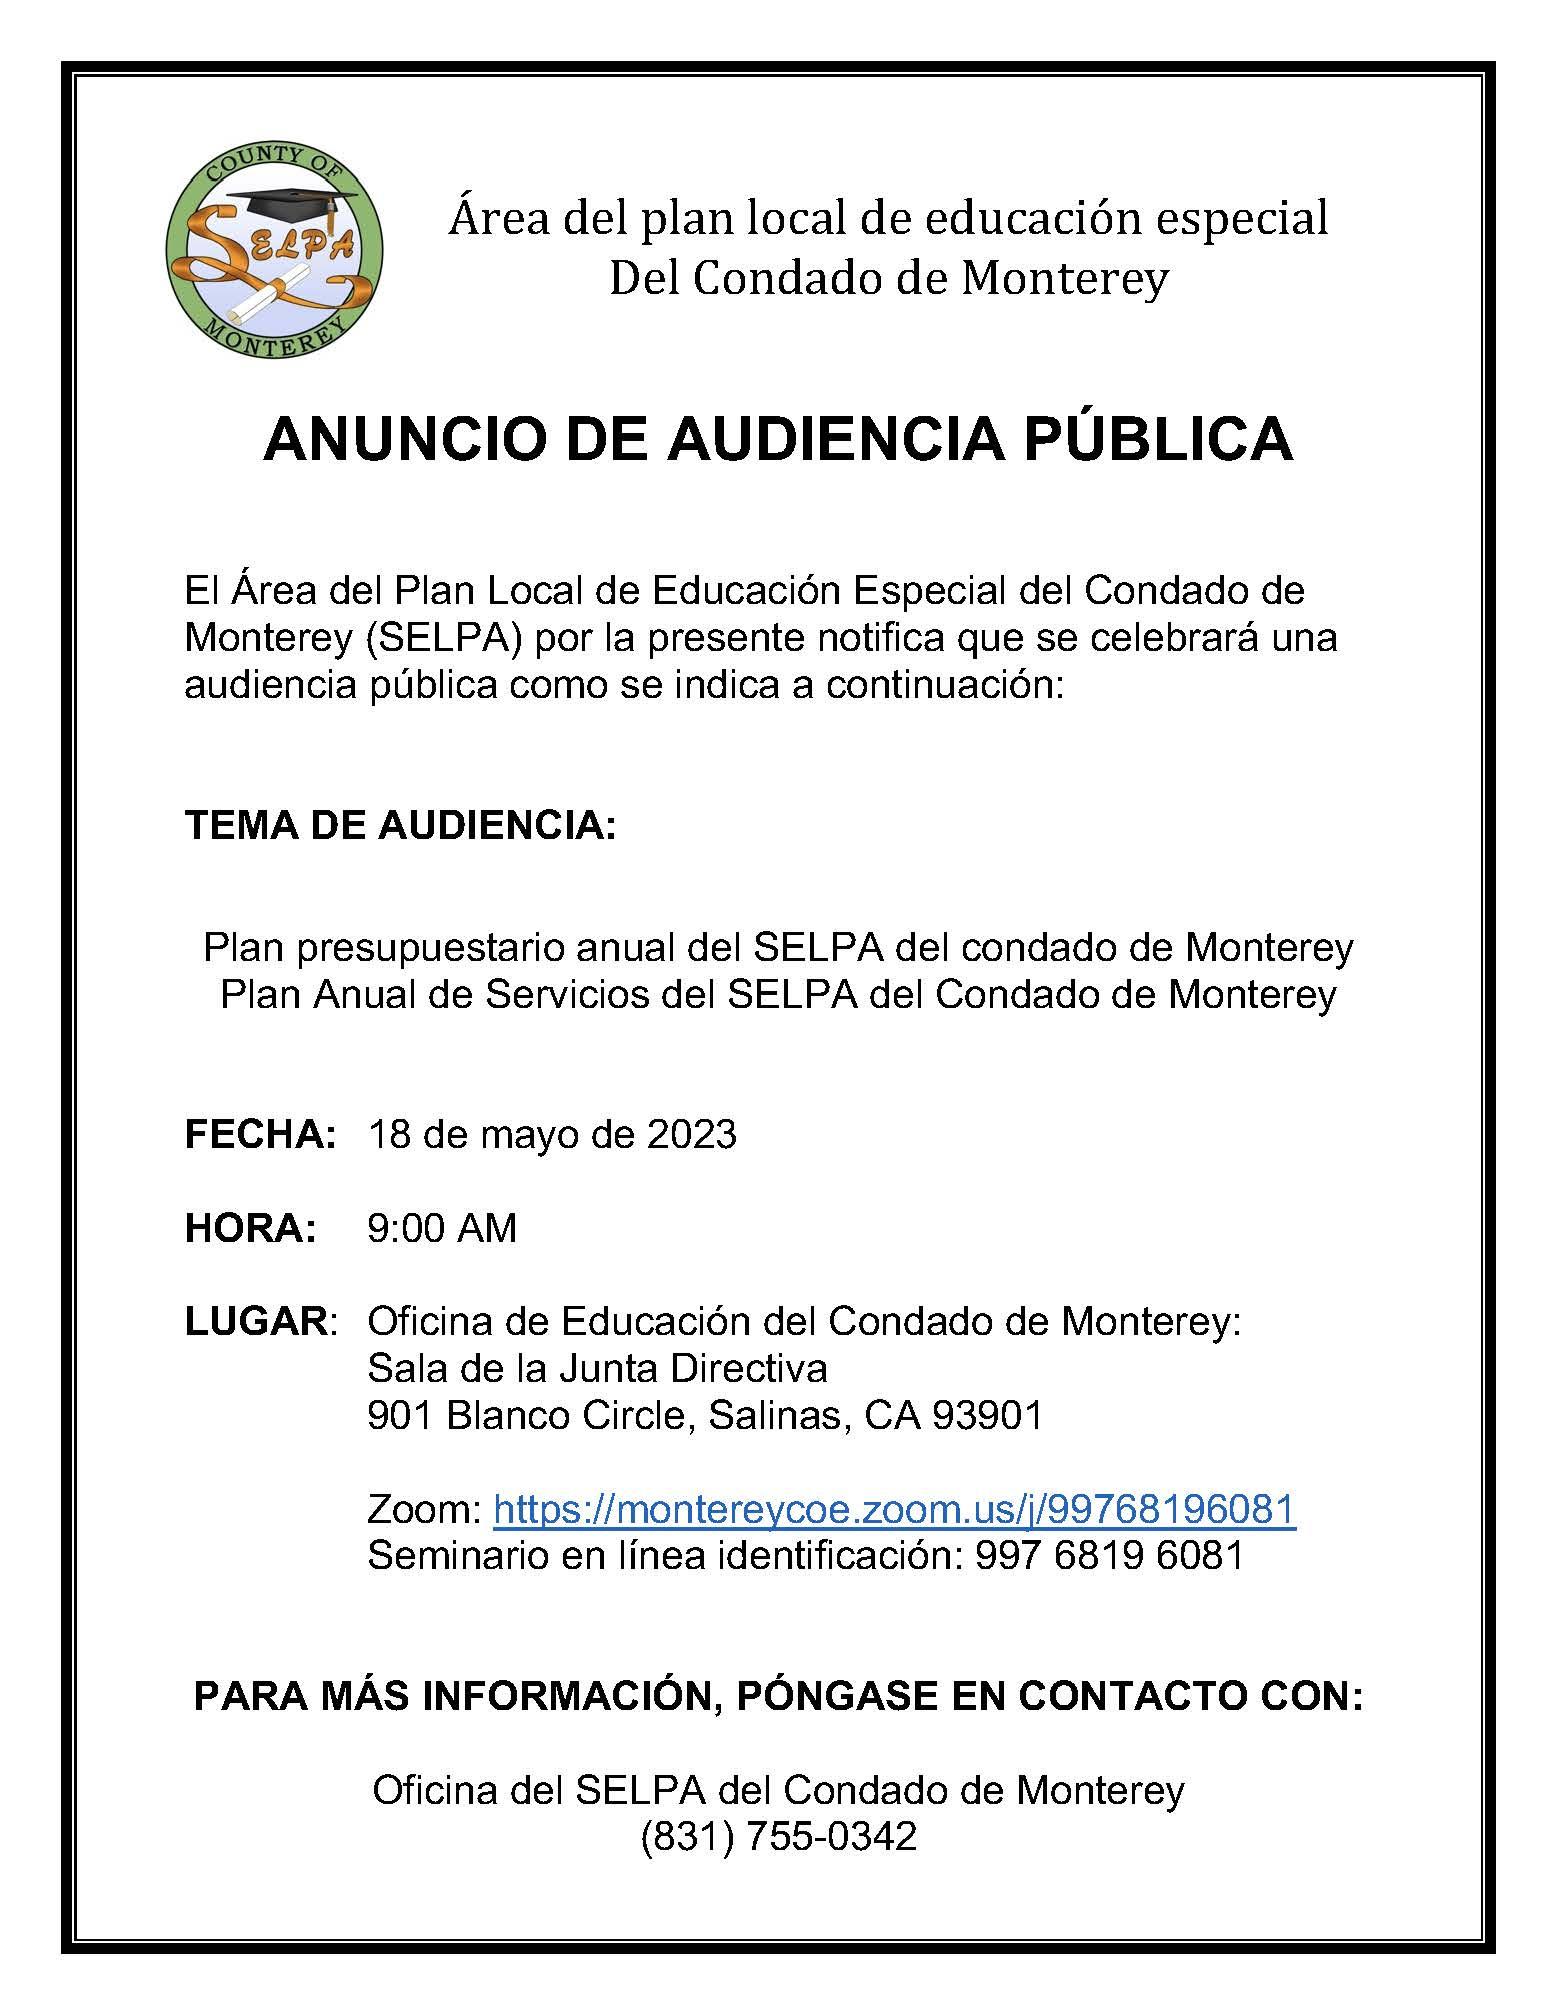 Spanish Public Hearing: The public hearing for the Monterey County SELPA Annual Budget Plan and Annual Service Plan will be held during the SELPA Governance Council meeting scheduled for May 18, 2023.  